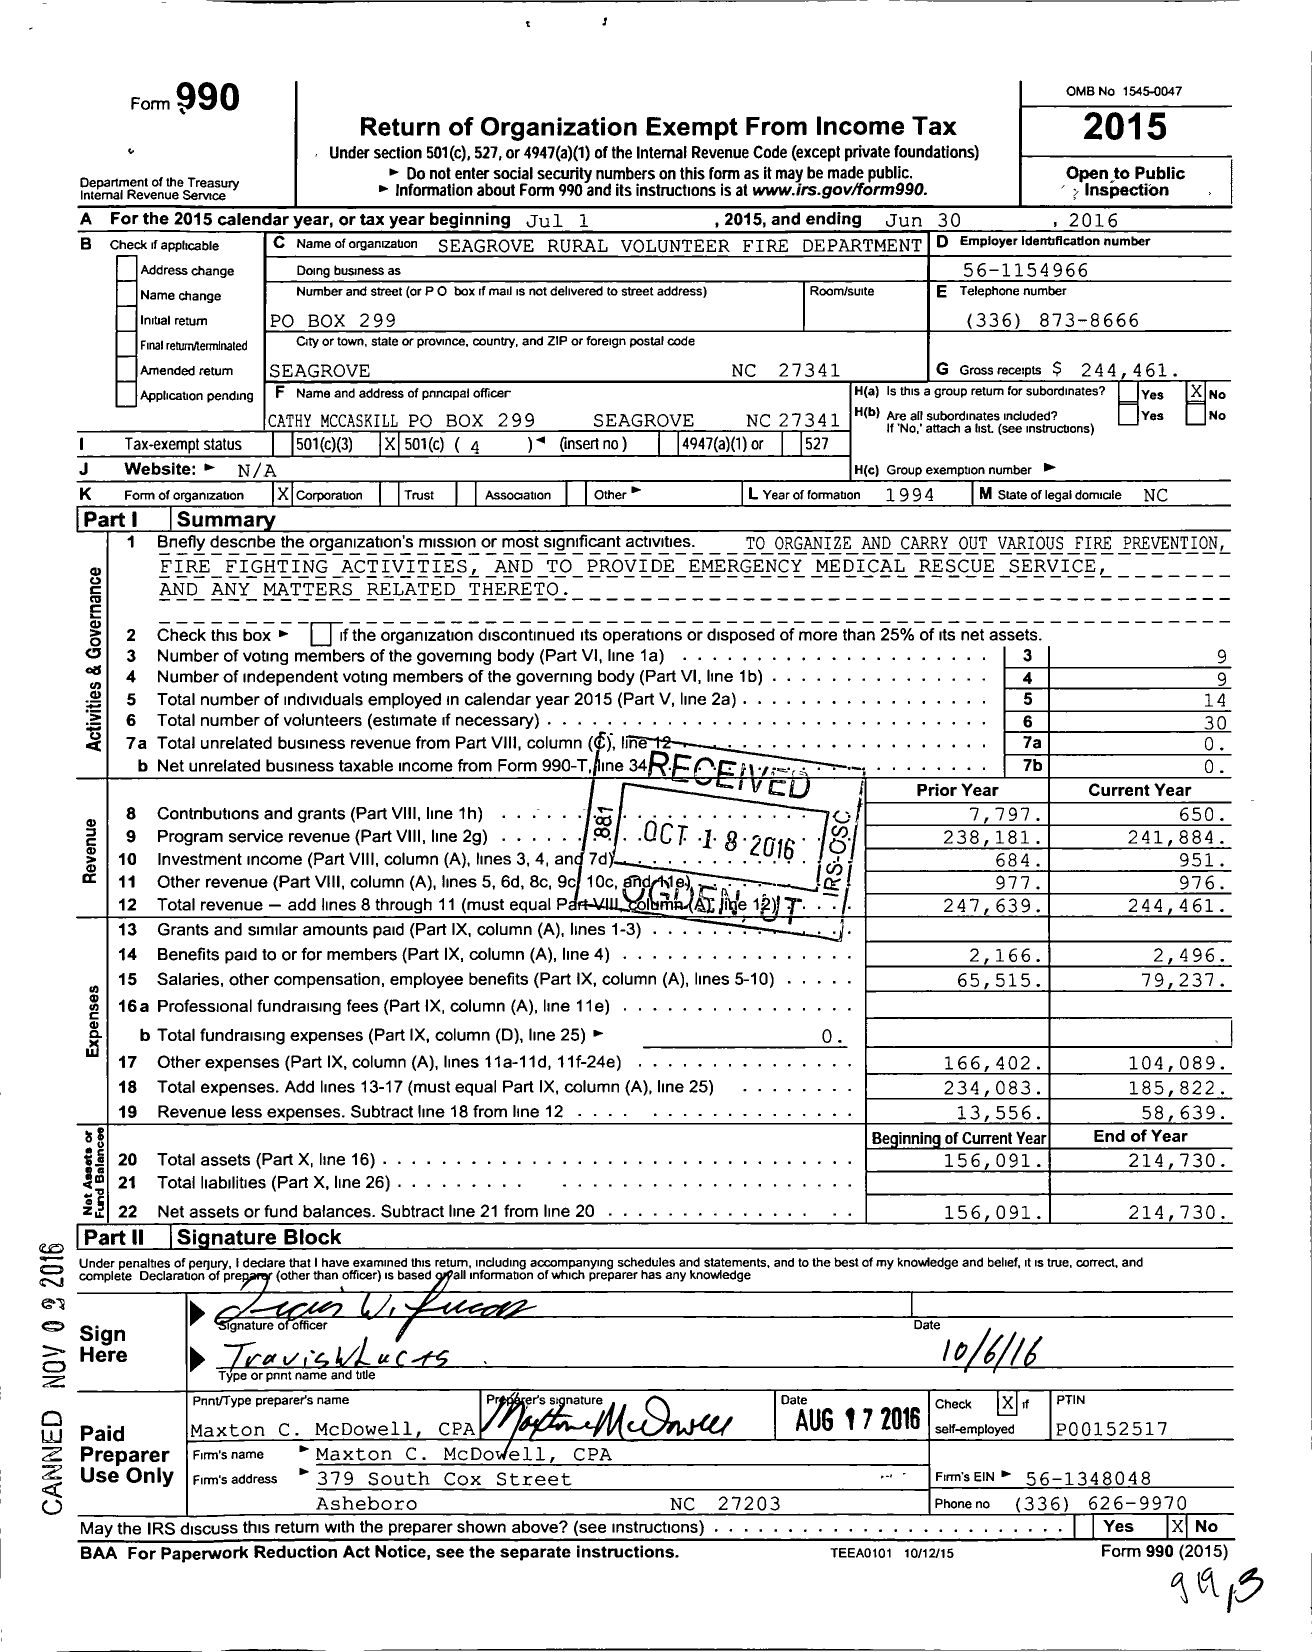 Image of first page of 2015 Form 990O for Seagrove Rural Volunteer Fire Department